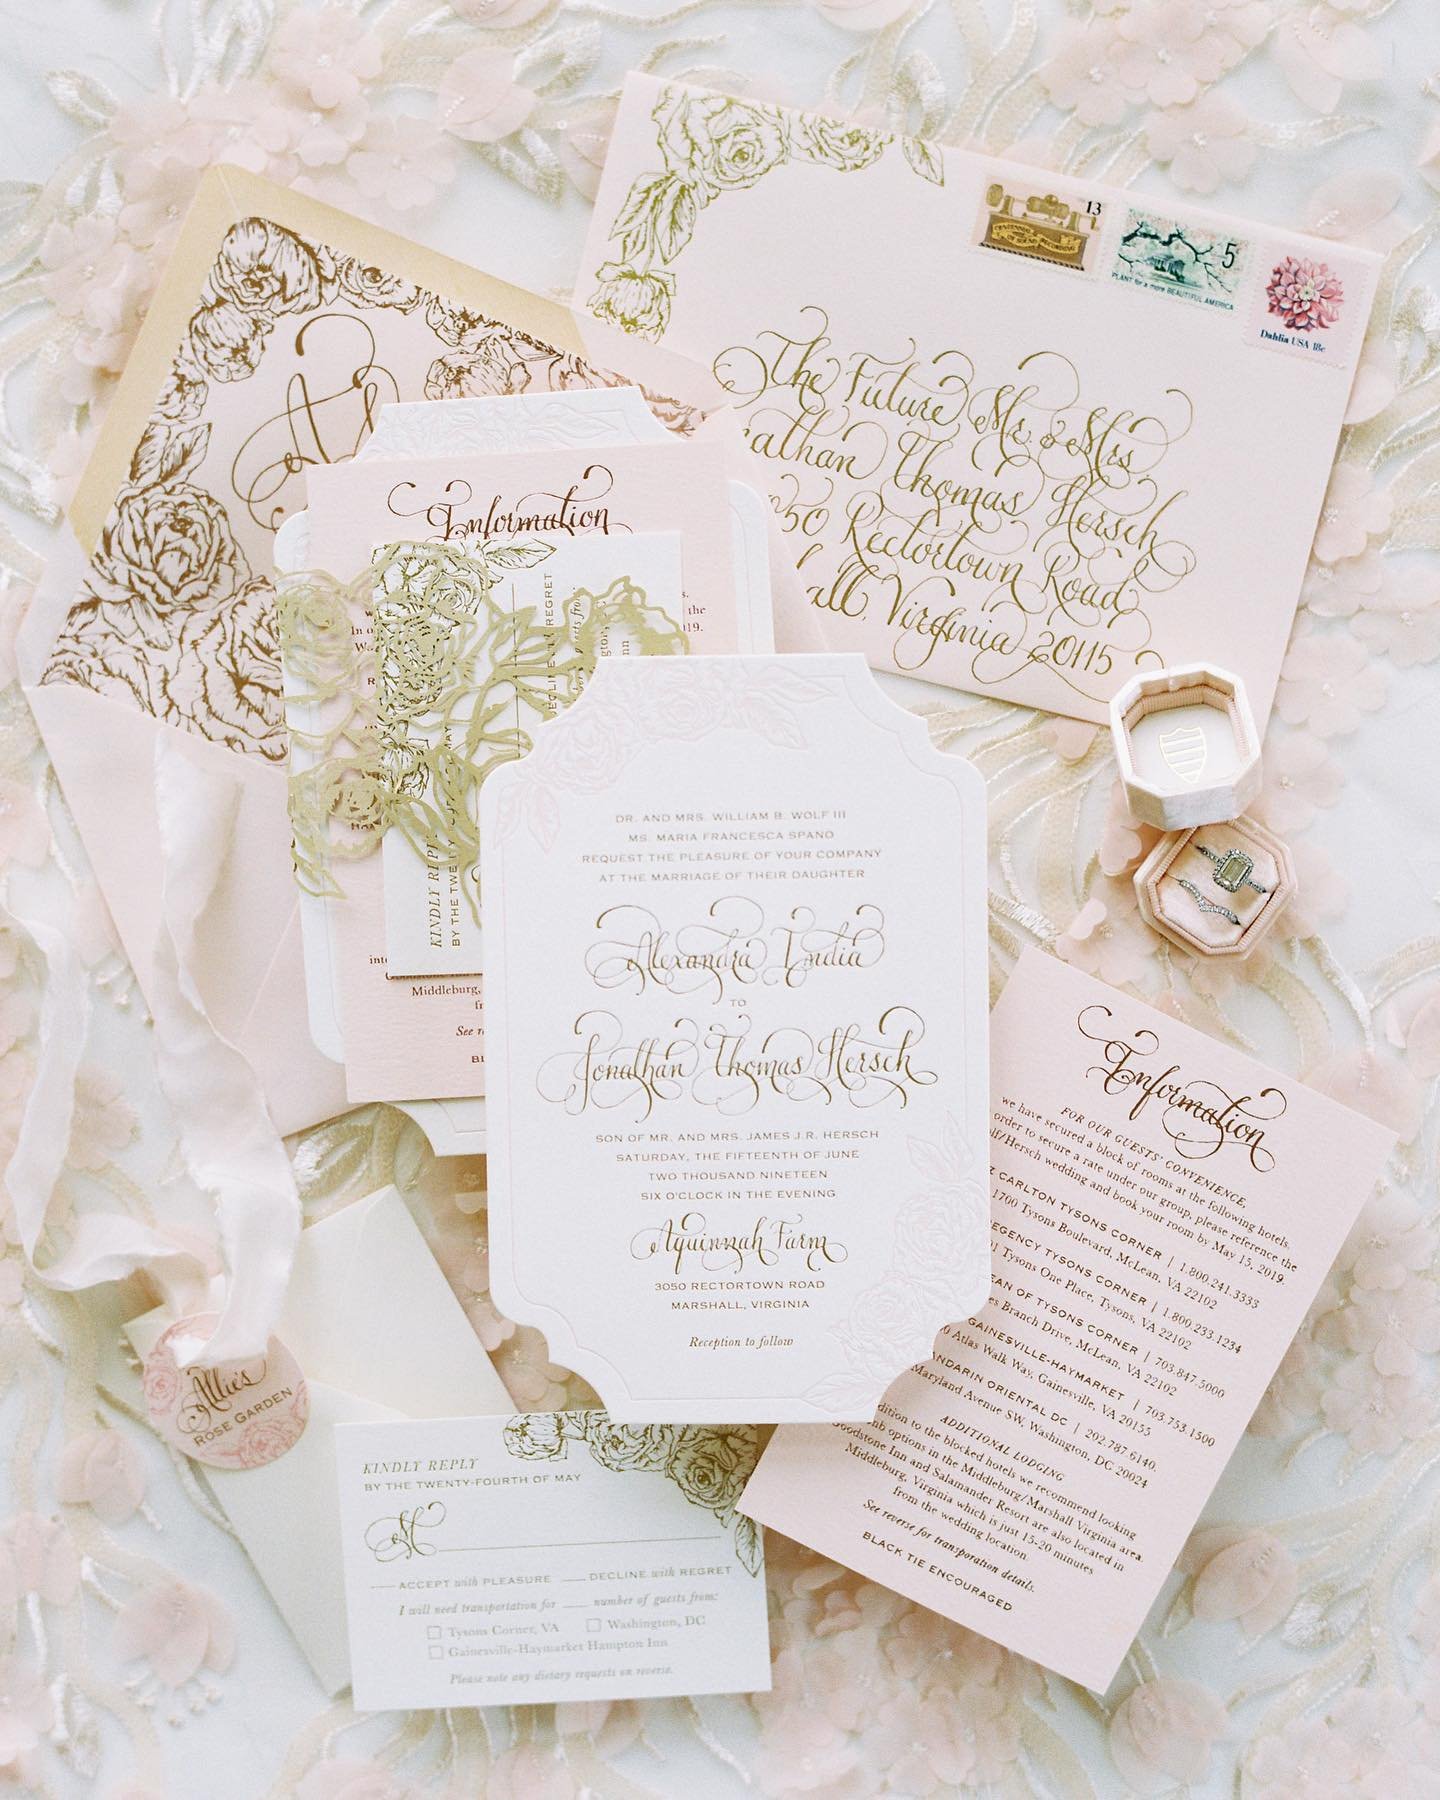 Talk about a show stopper! We will forever be in love with this beauty of an invitation suite ✨ Swipe to also see the Save the Date!

Vendors:
Planning &amp; Design: Lauryn Prattes Events @laurynprattes
Photography: Abby Jiu Photography @abbyjiu
Invi